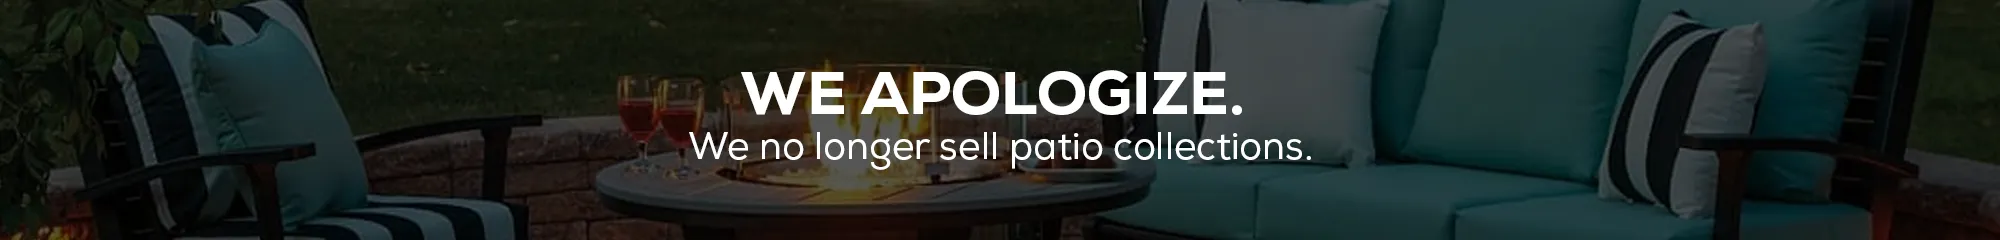 We apologize.  We no longer sell patio collections.